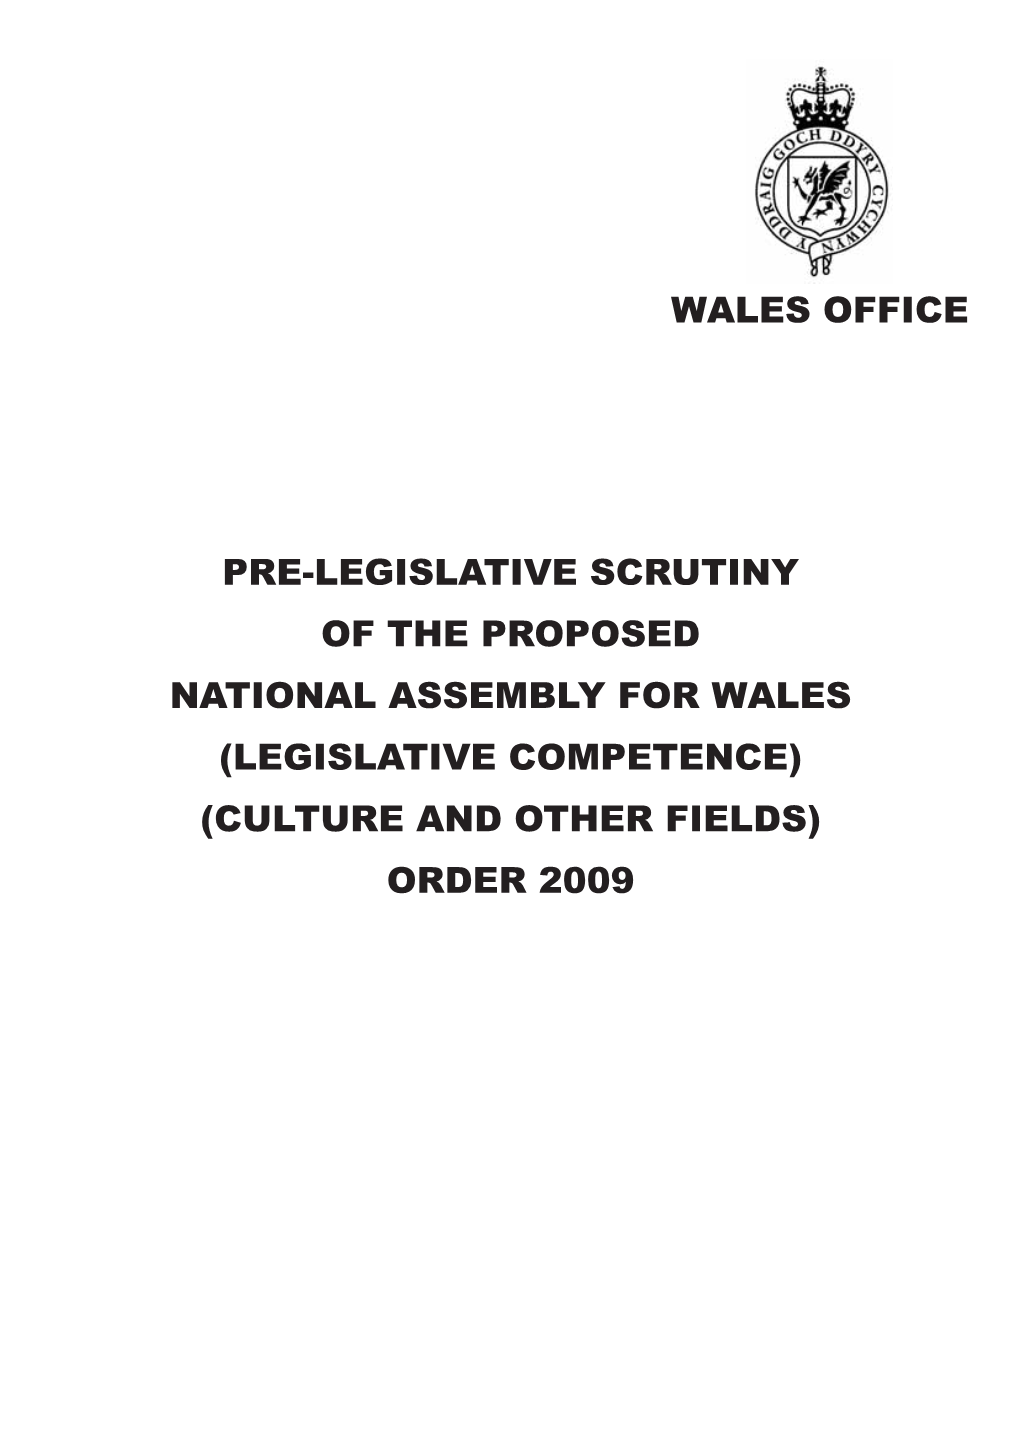 Legislative Competence) (Culture and Other Fields) Order 2009 Wales Office